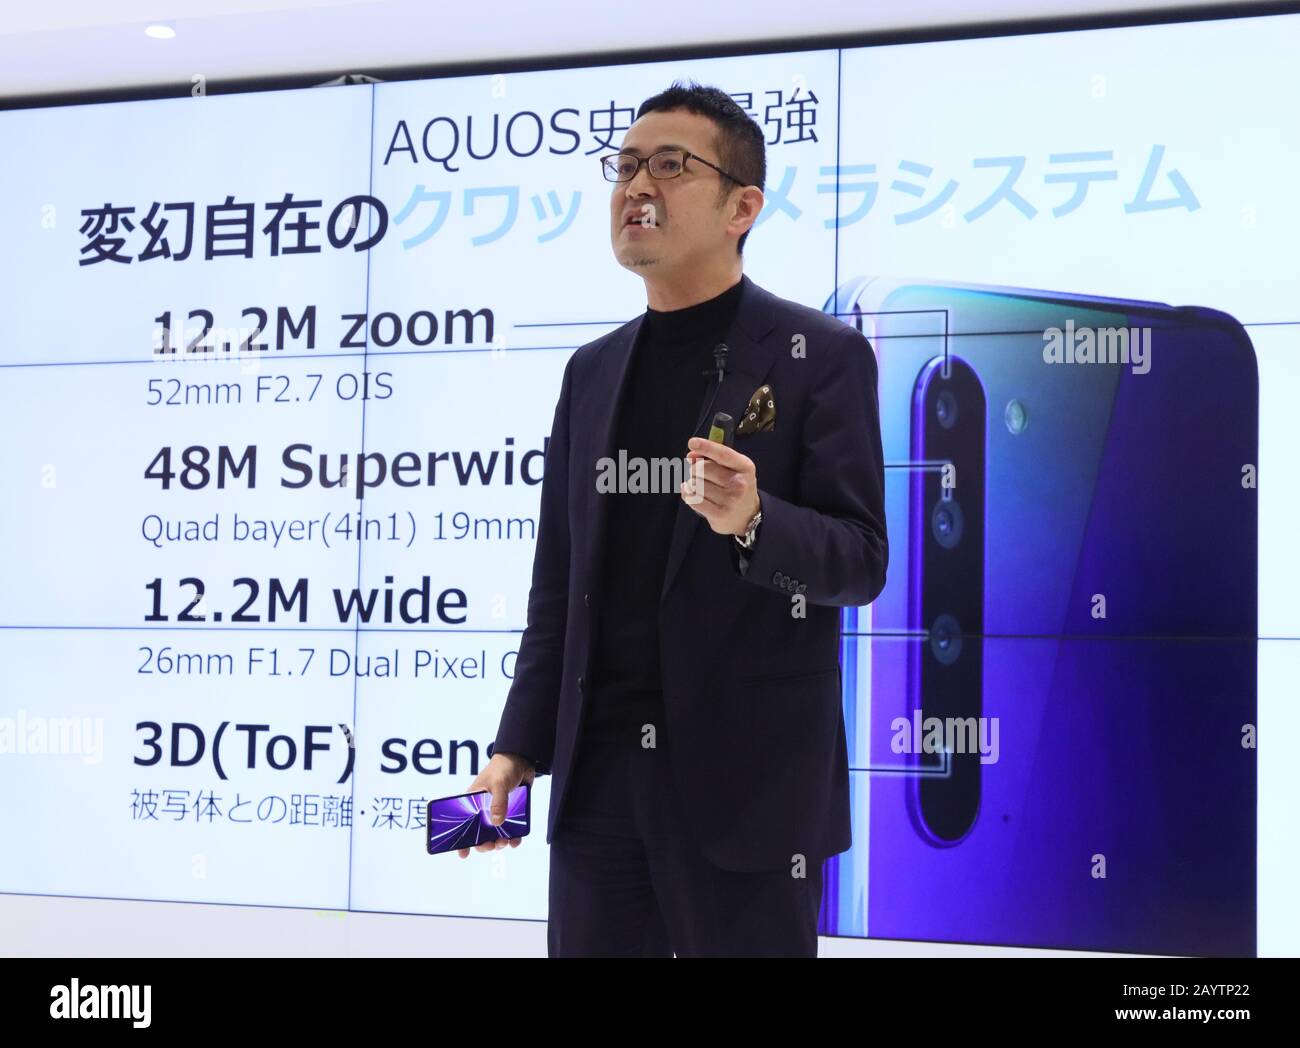 Tokyo, Japan. 17th Feb, 2020. Japan's electronics giant Sharp unveils the new 5G smartphone "AQUOS R5G" equipped with Qualcomm's Snapdragon 865 on its CPU, 6.5-inch sized IGZO LCD display and three cameras with a 3D sensor at the company's Tokyo office in Tokyo on Monday, February 17, 2020. Sharp will put Japan's first 5G smartphone on the market in this spring. Credit: Yoshio Tsunoda/AFLO/Alamy Live News Stock Photo